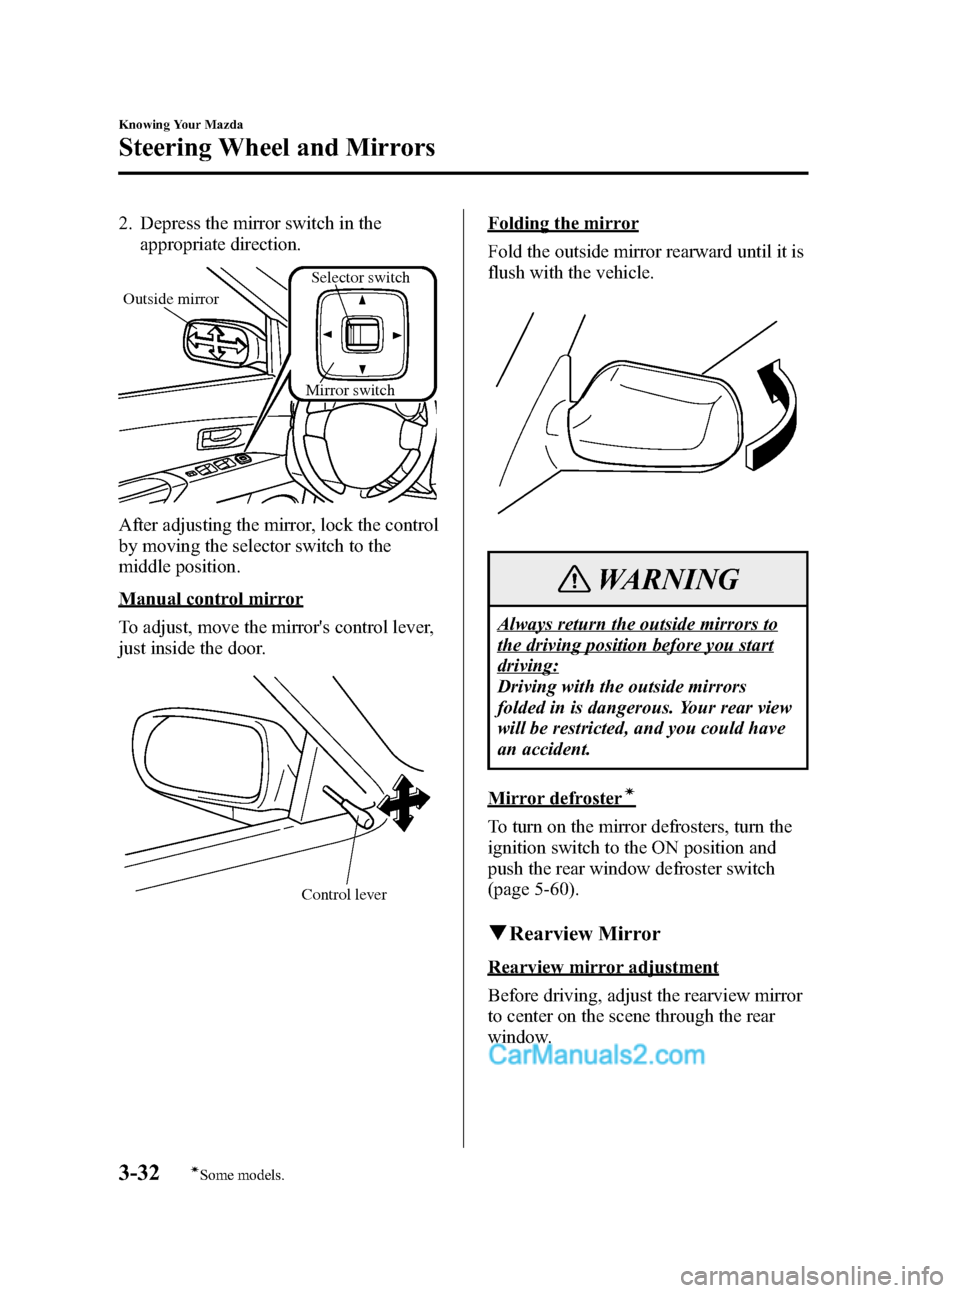 MAZDA MODEL MAZDASPEED 3 2007  Owners Manual (in English) Black plate (106,1)
2. Depress the mirror switch in the
appropriate direction.
Mirror switch
Outside mirror
Selector switch
After adjusting the mirror, lock the control
by moving the selector switch t